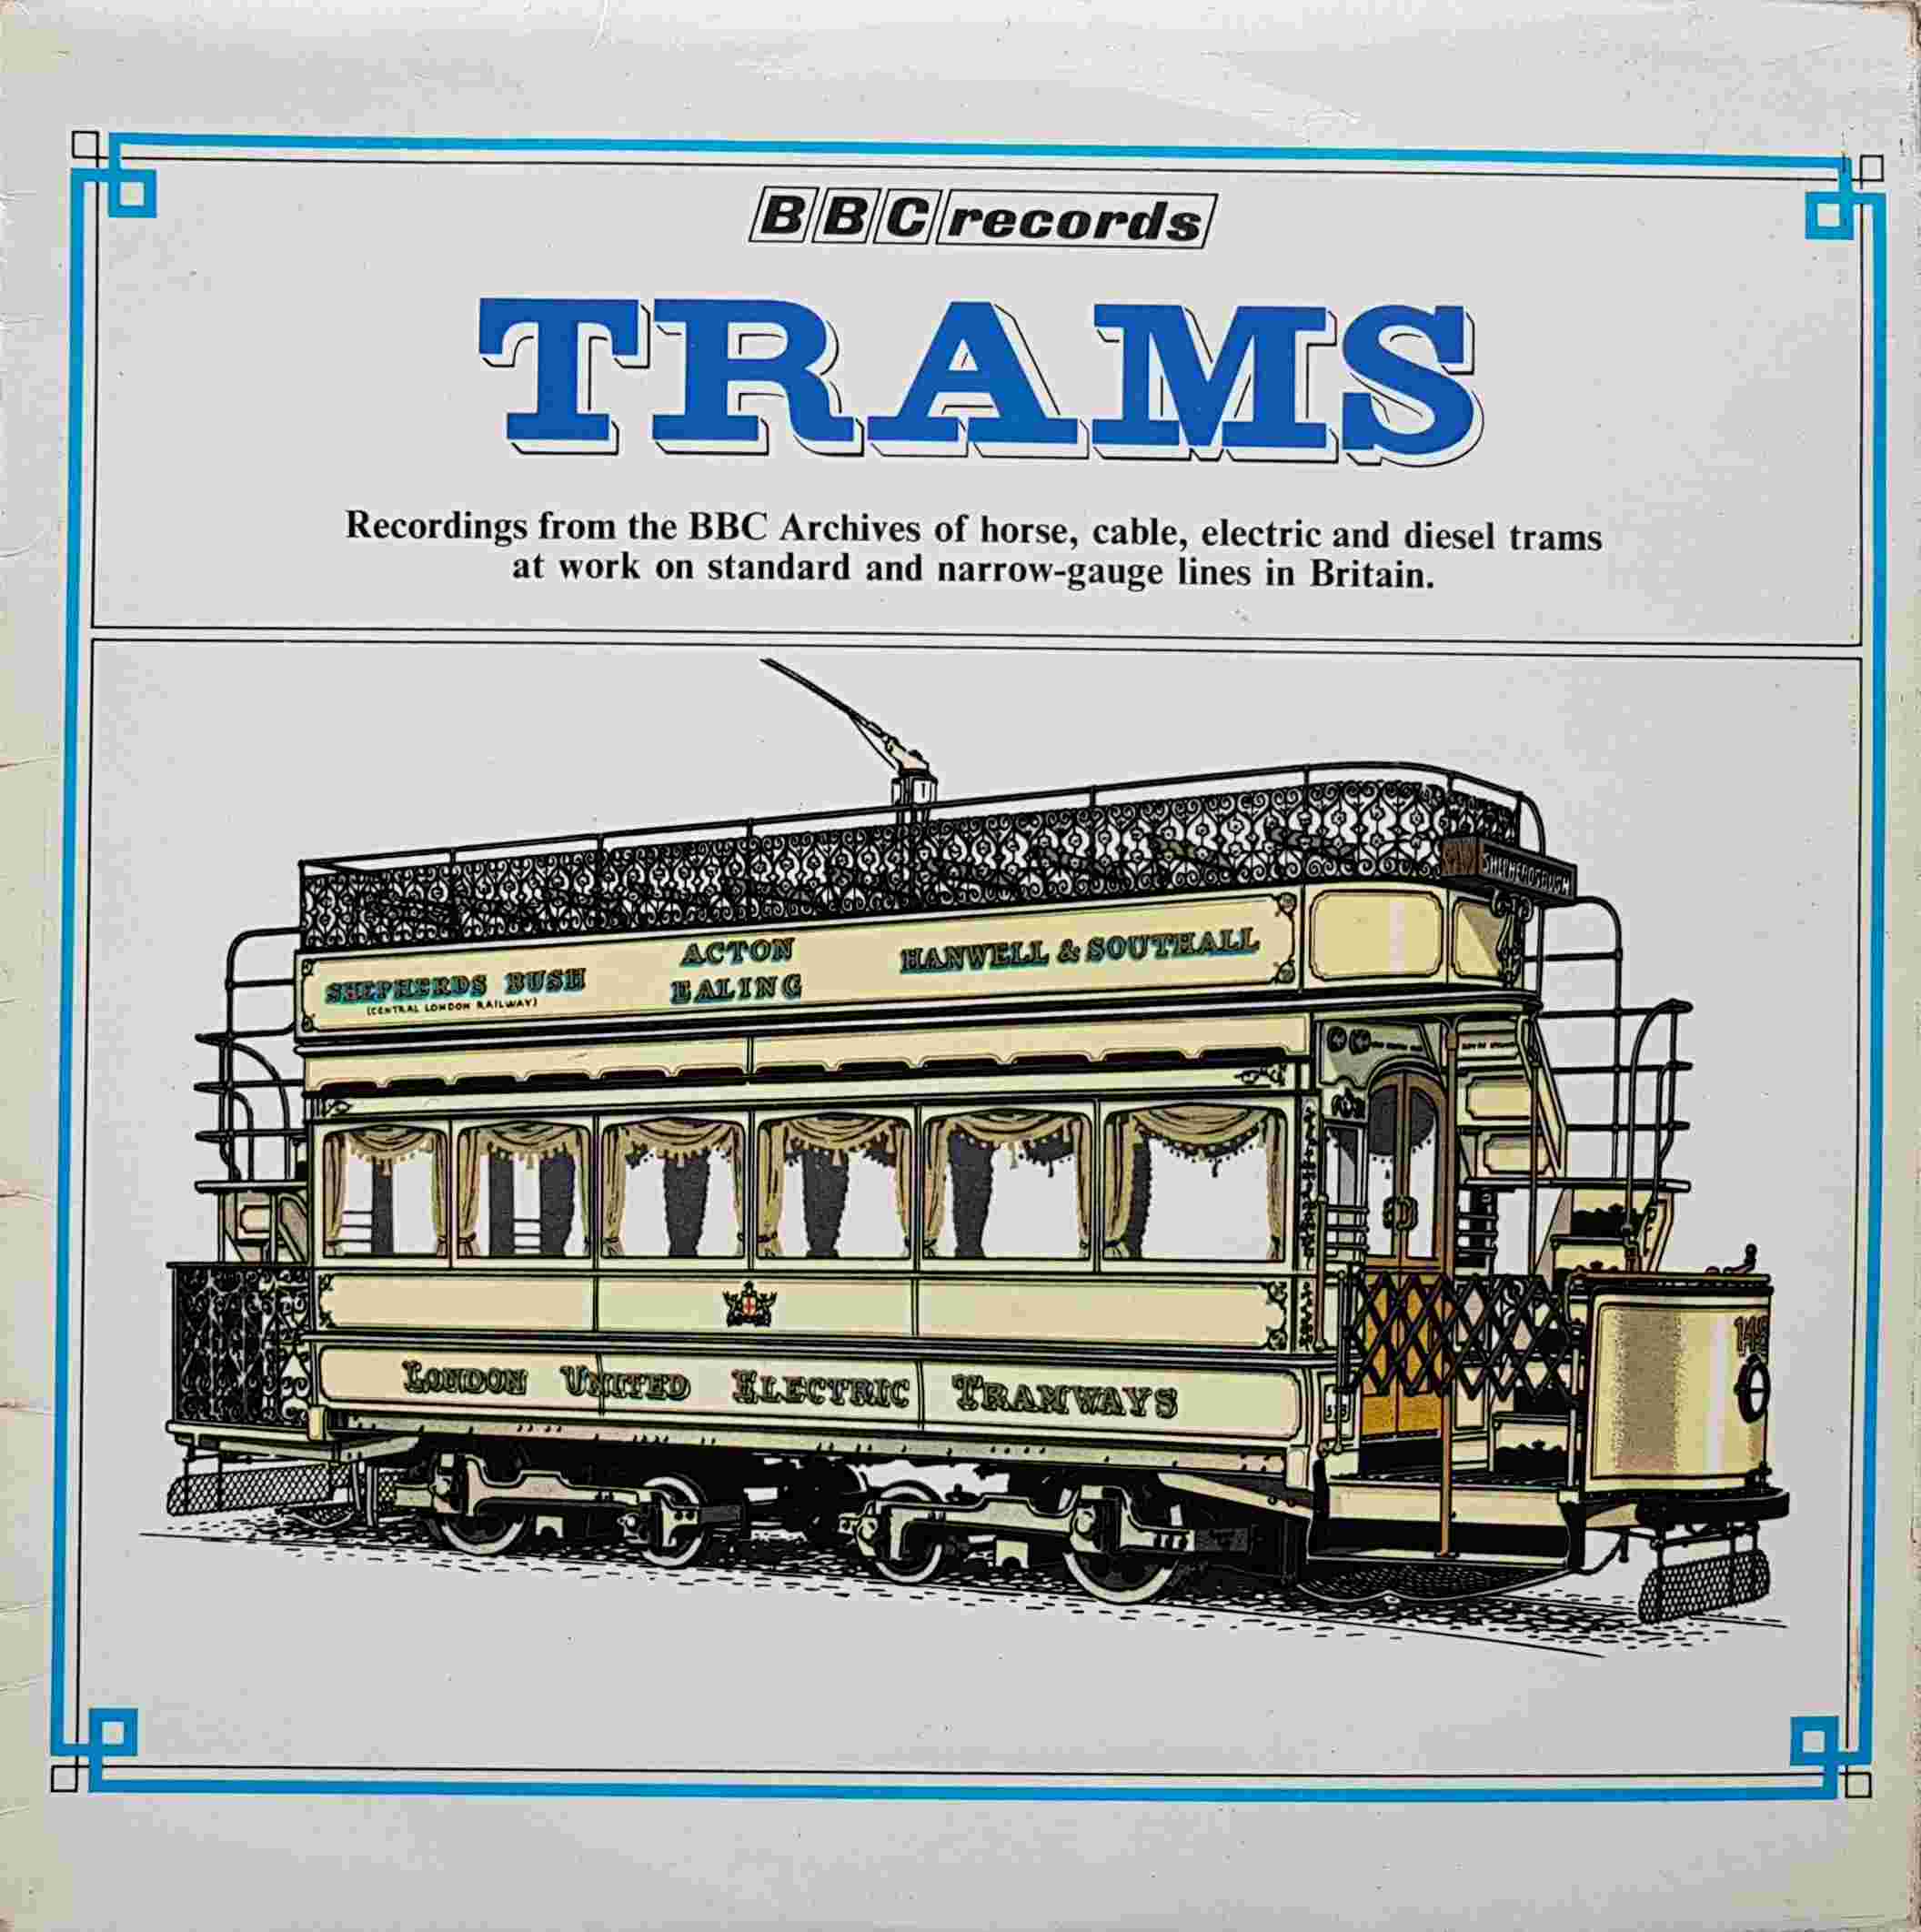 Picture of REB 90 Trams by artist Various from the BBC records and Tapes library